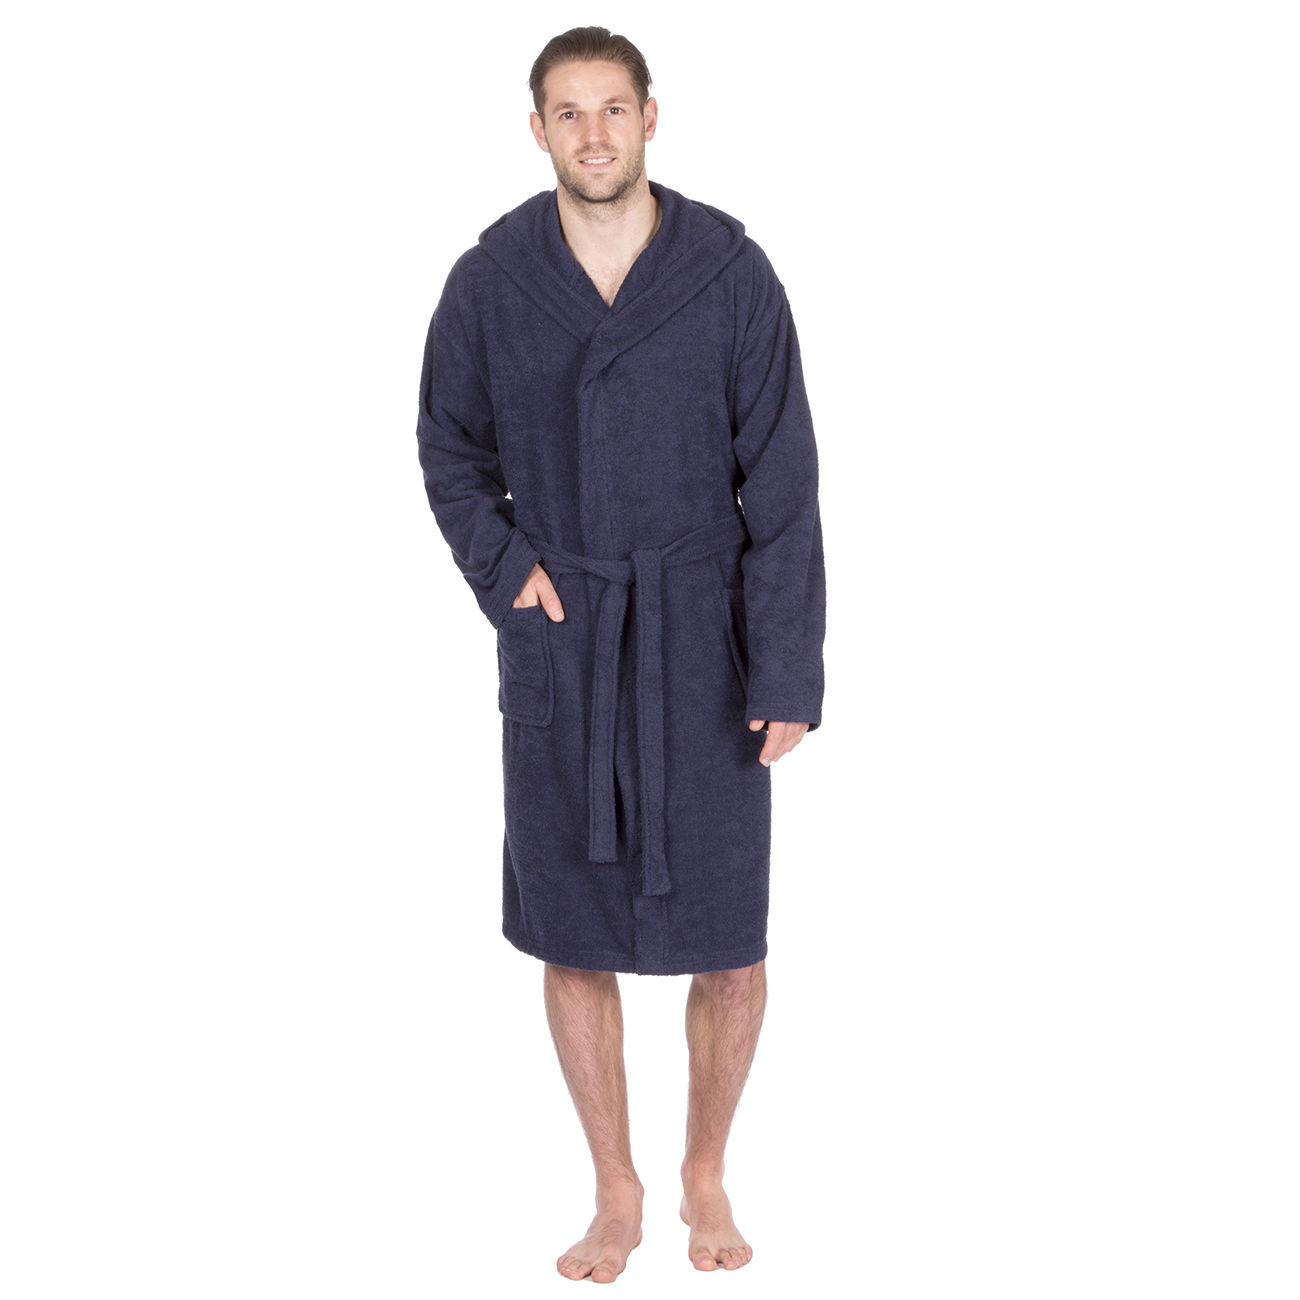 Mens Deluxe Luxury Cotton Soft Terry Cloth Bath Spa Robe Towelling ...